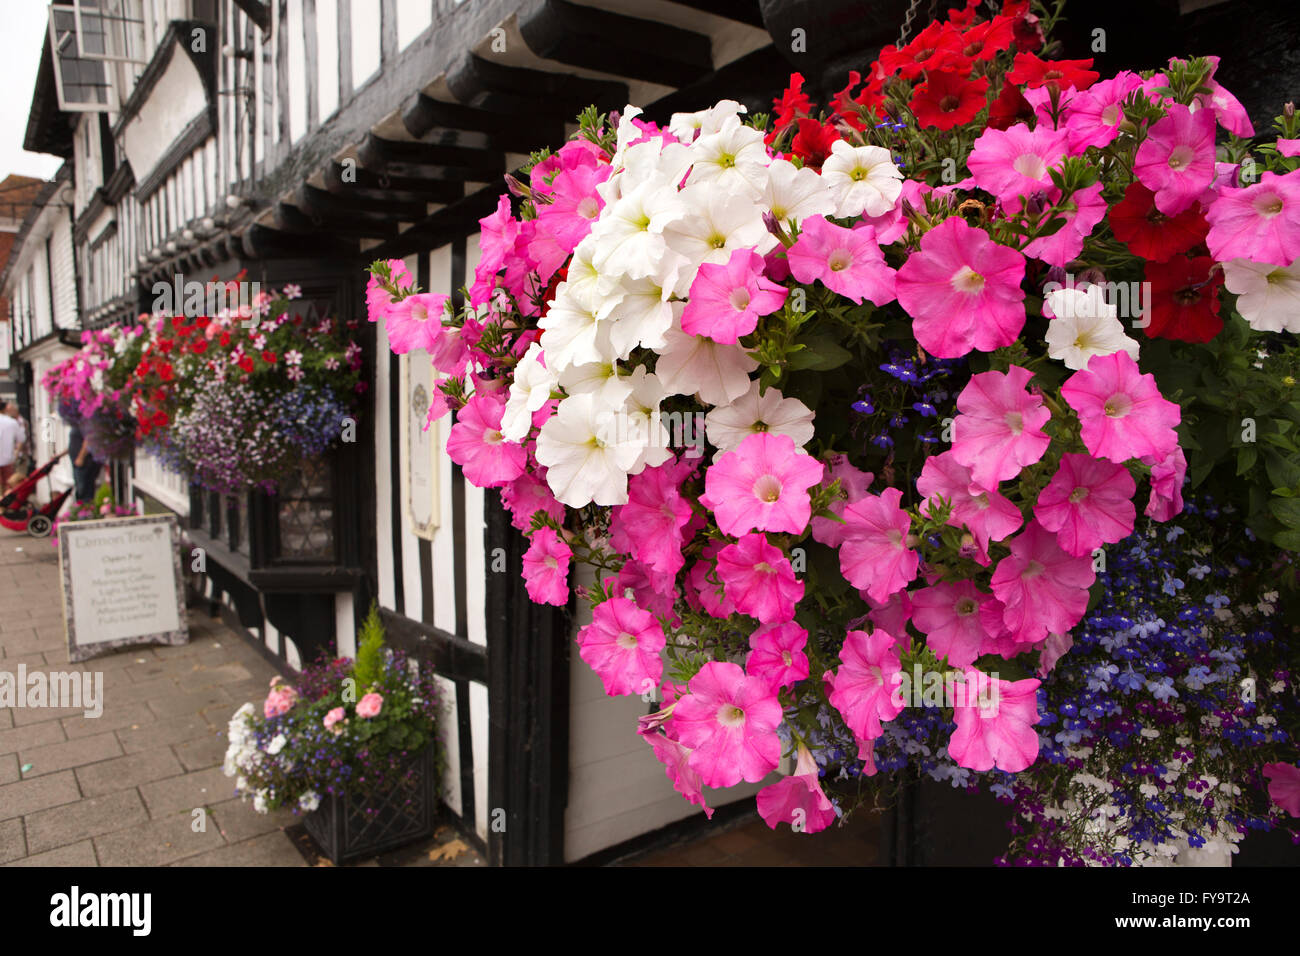 UK, Kent, Tenterden, High Street, pink and white petunia flowers in hanging baskets outside Wealden Hall House, Stock Photo